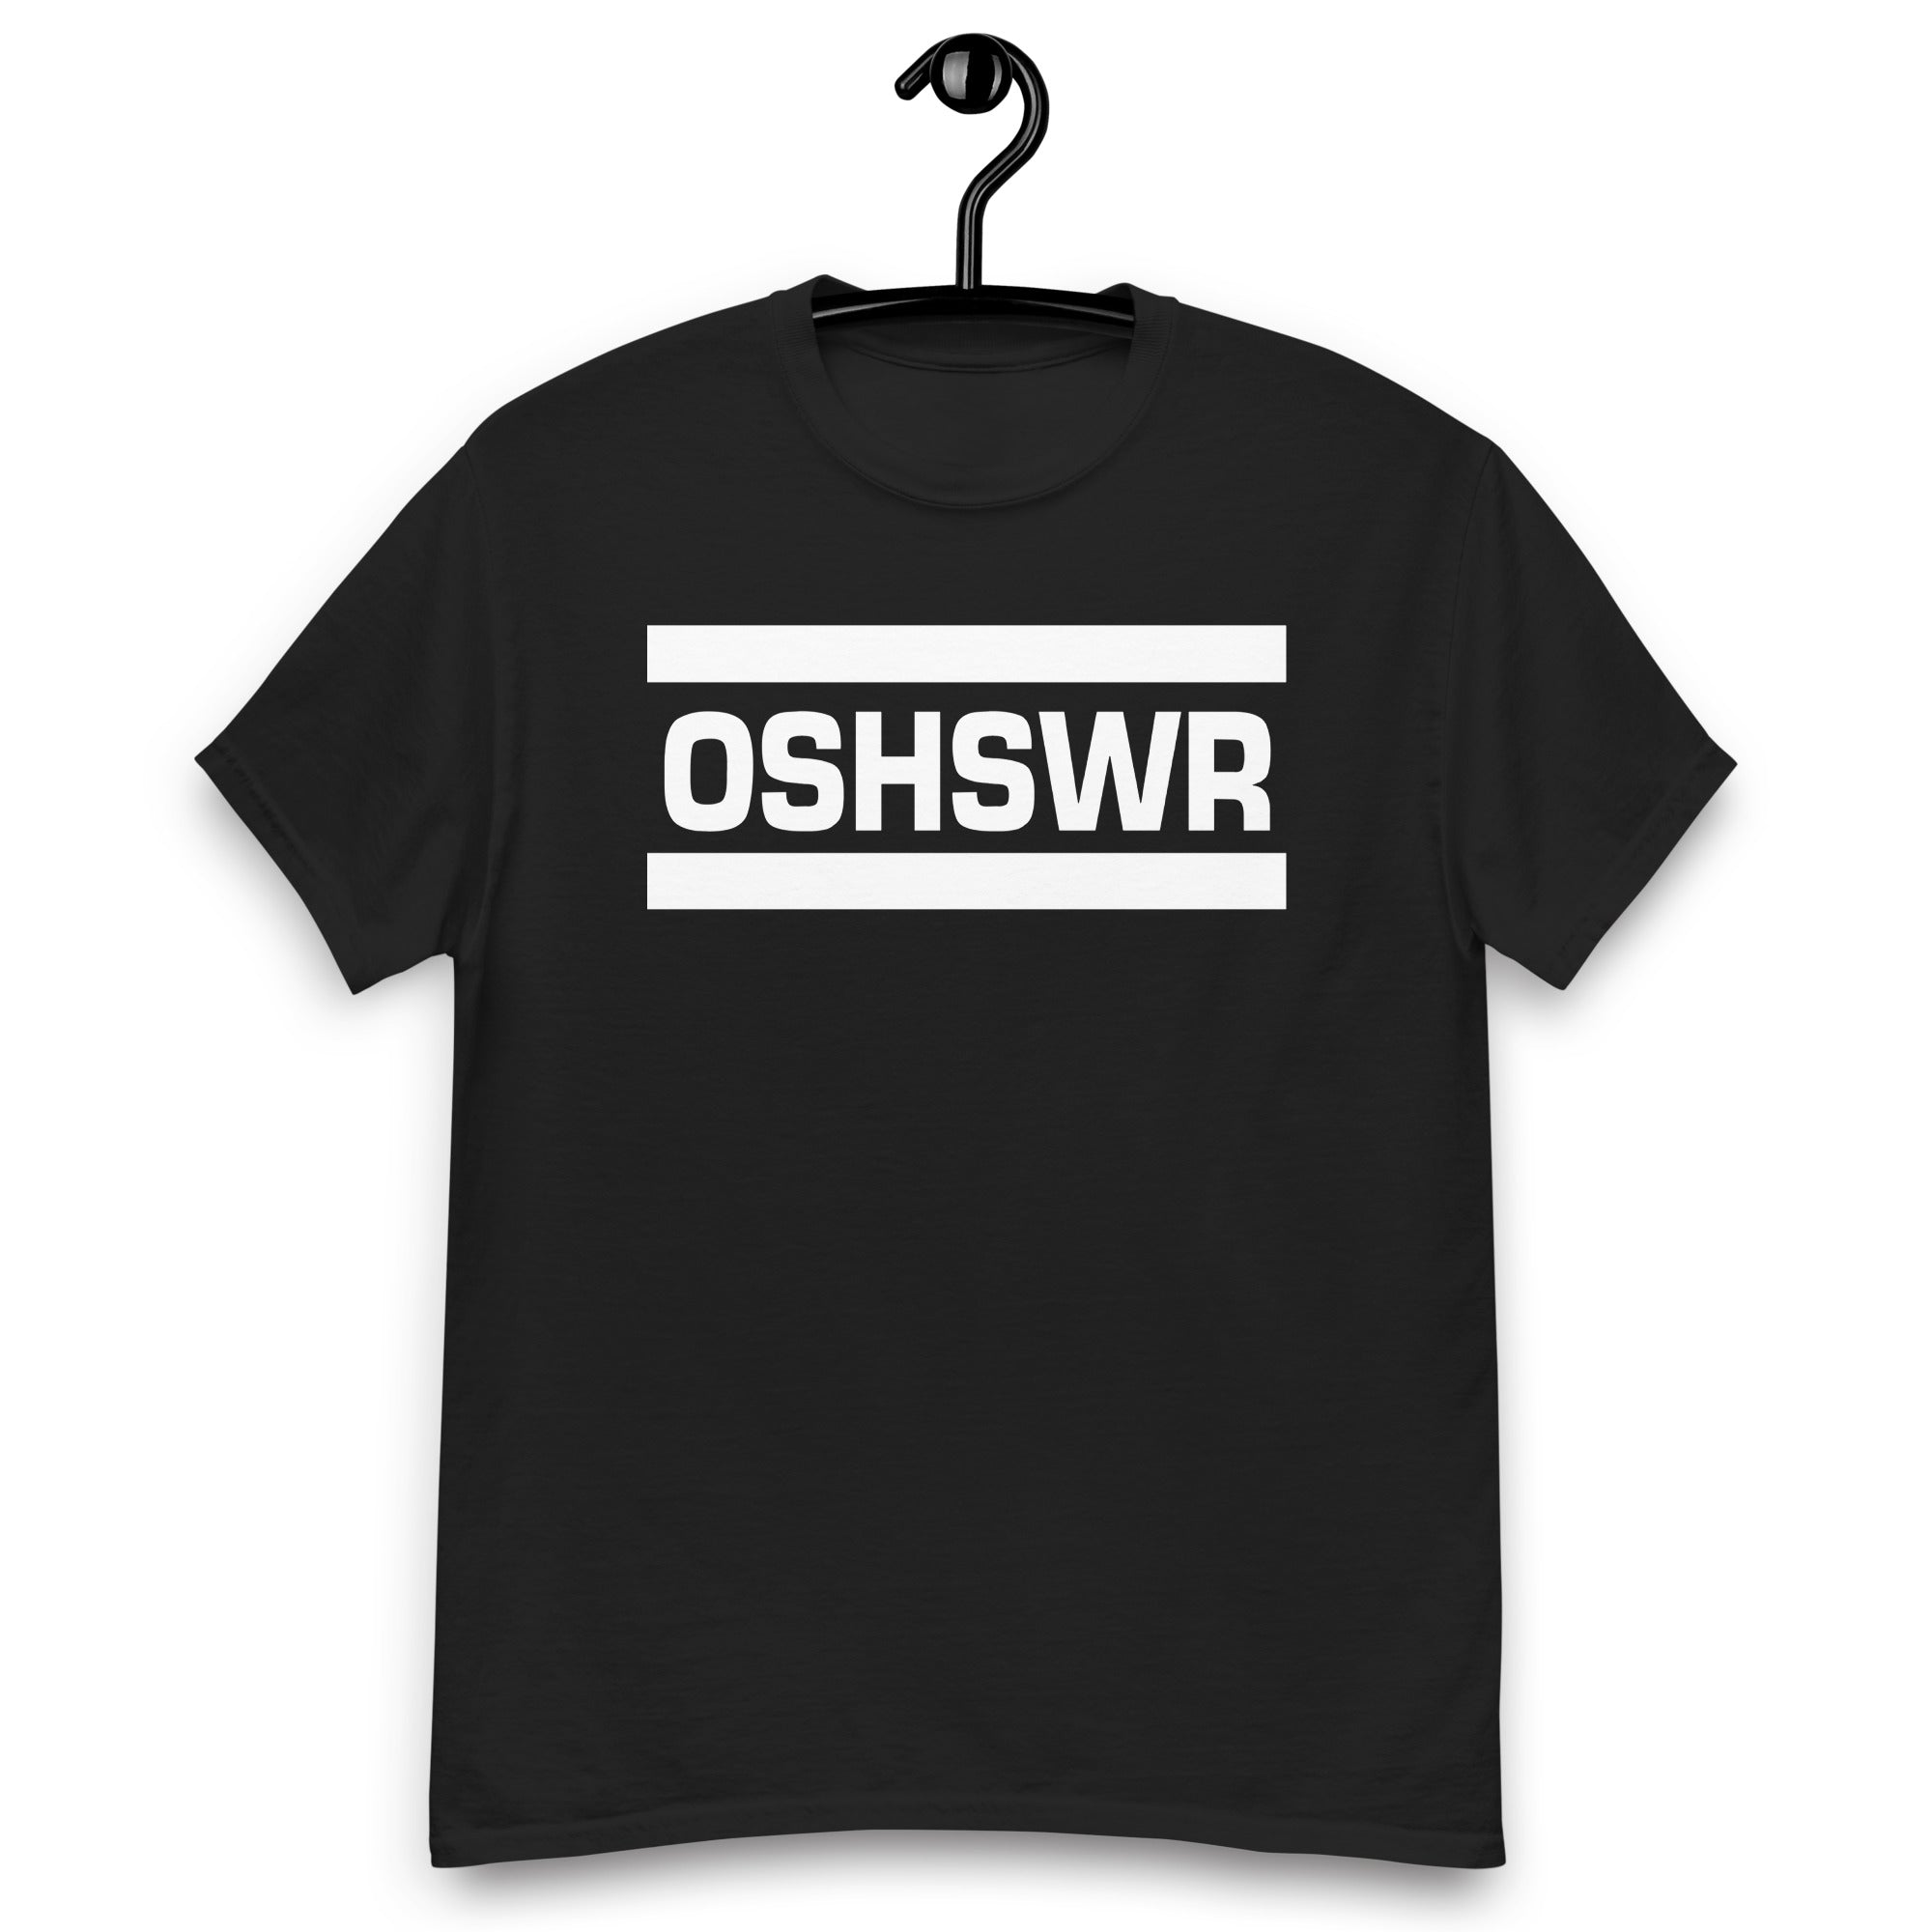 OSHSWR 1-Color Unisex classic tee